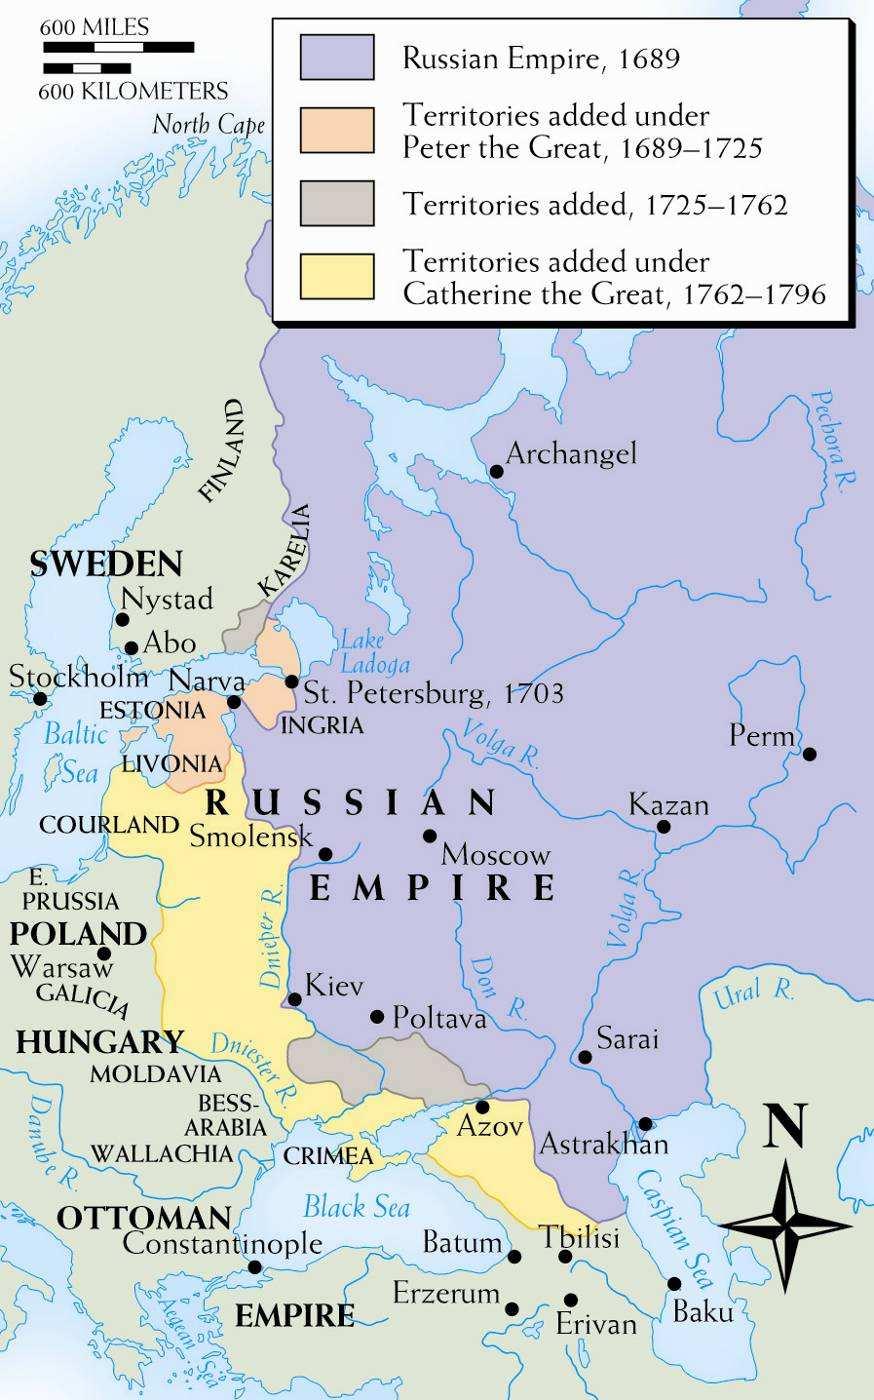 transportation and trade Abolished serfdom Land taxation Catherine the Great of Russia Limited administrative reform local control of the